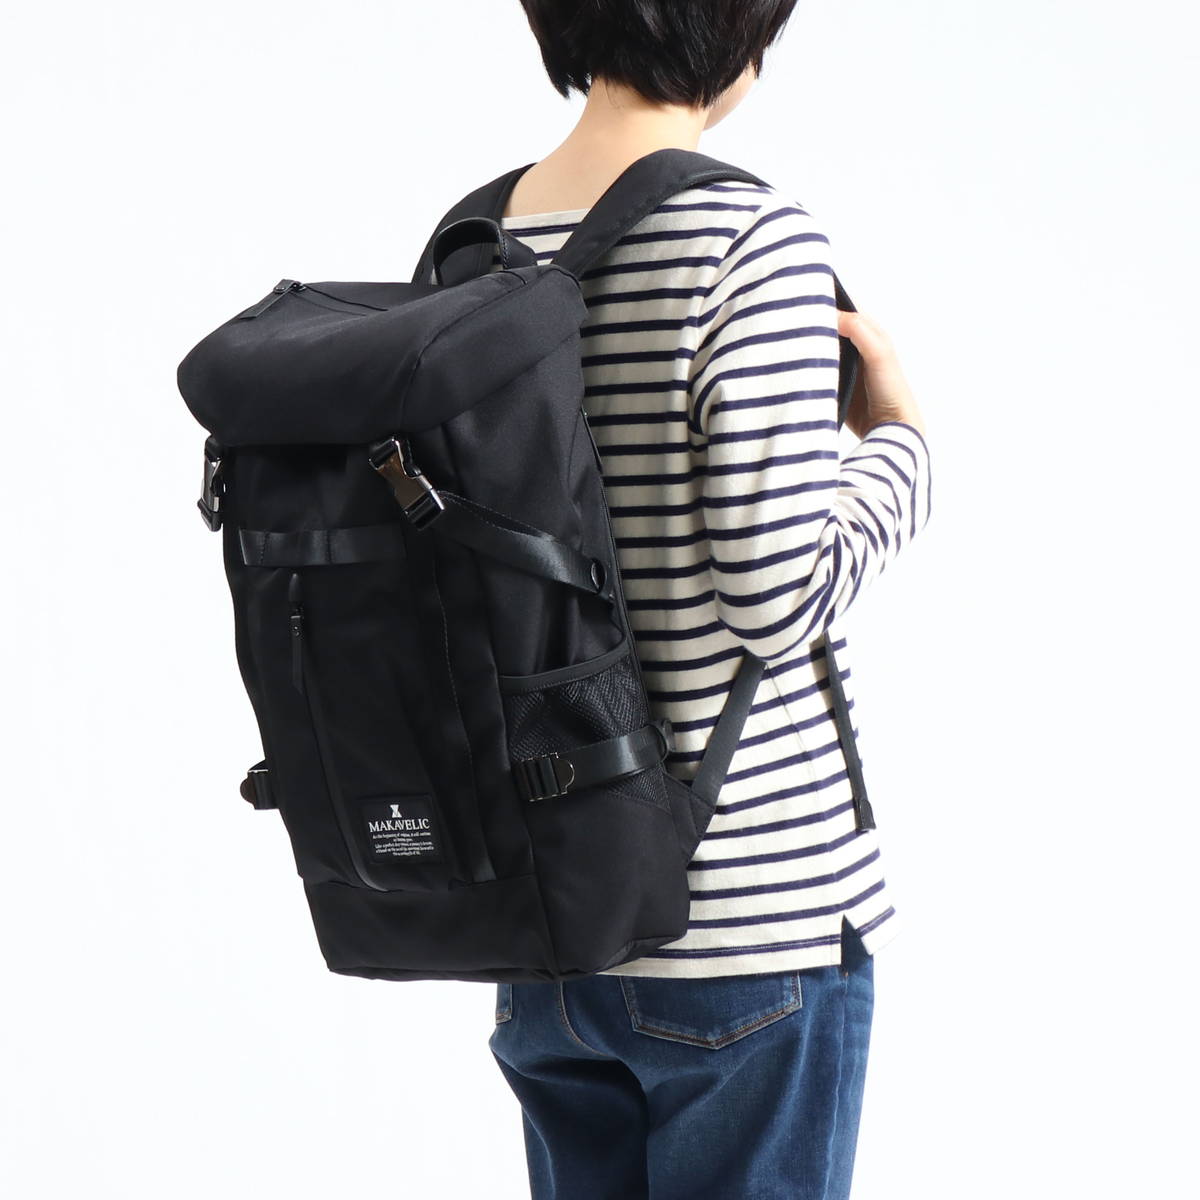 MAKAVELIC CHASE DOUBLE LINE BACK PACK